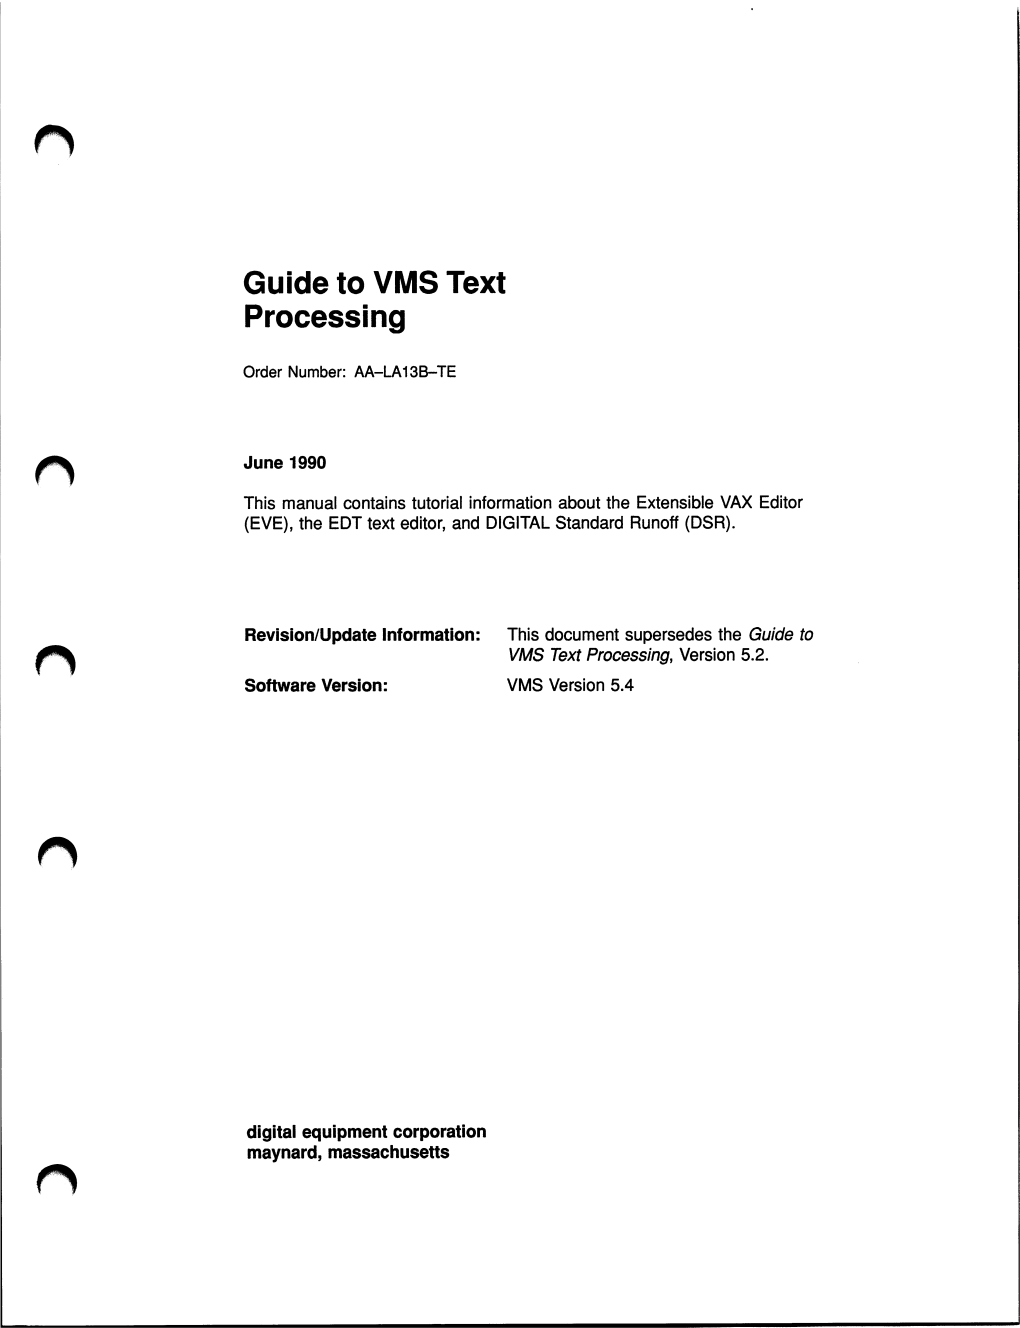 Guide to VMS Text Processing